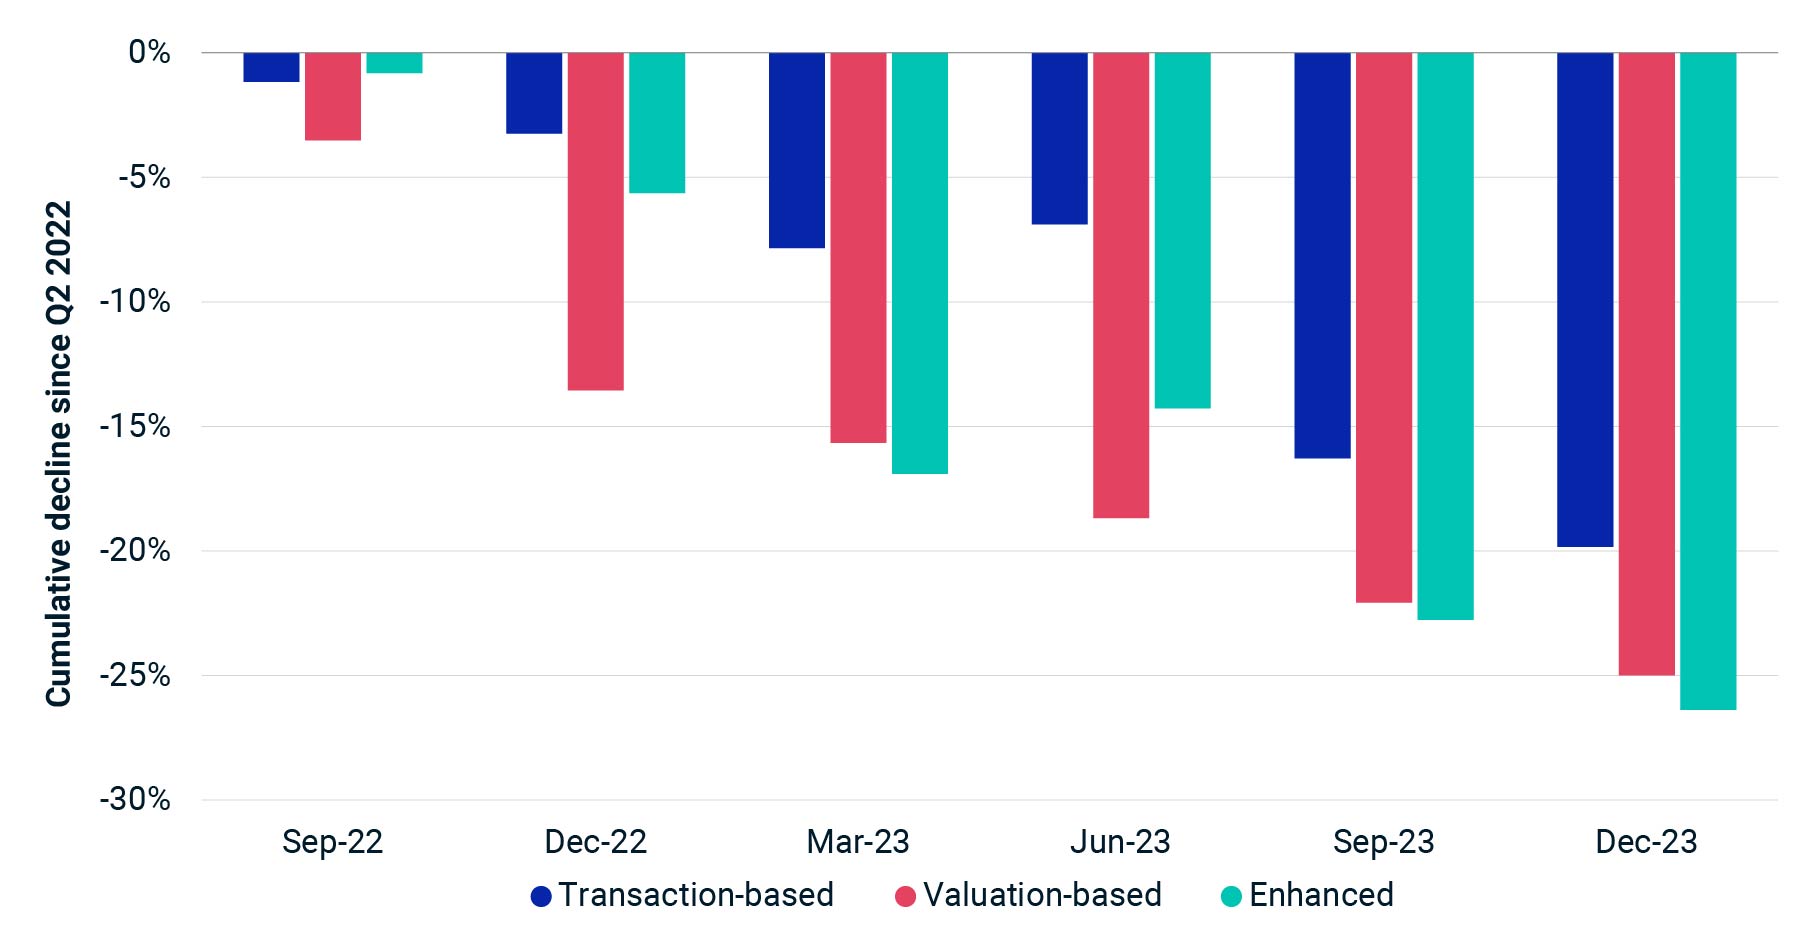 The chart displays a comparison of cumulative price declines since Q2 2022 for U.K. offices across three different metrics: Transaction-based, Valuation-based, and Enhanced. The y-axis shows the percentage of cumulative decline, ranging from 0% to -30%. Each period has three bars corresponding to the three metrics, indicating the percentage decline at that point in time. 